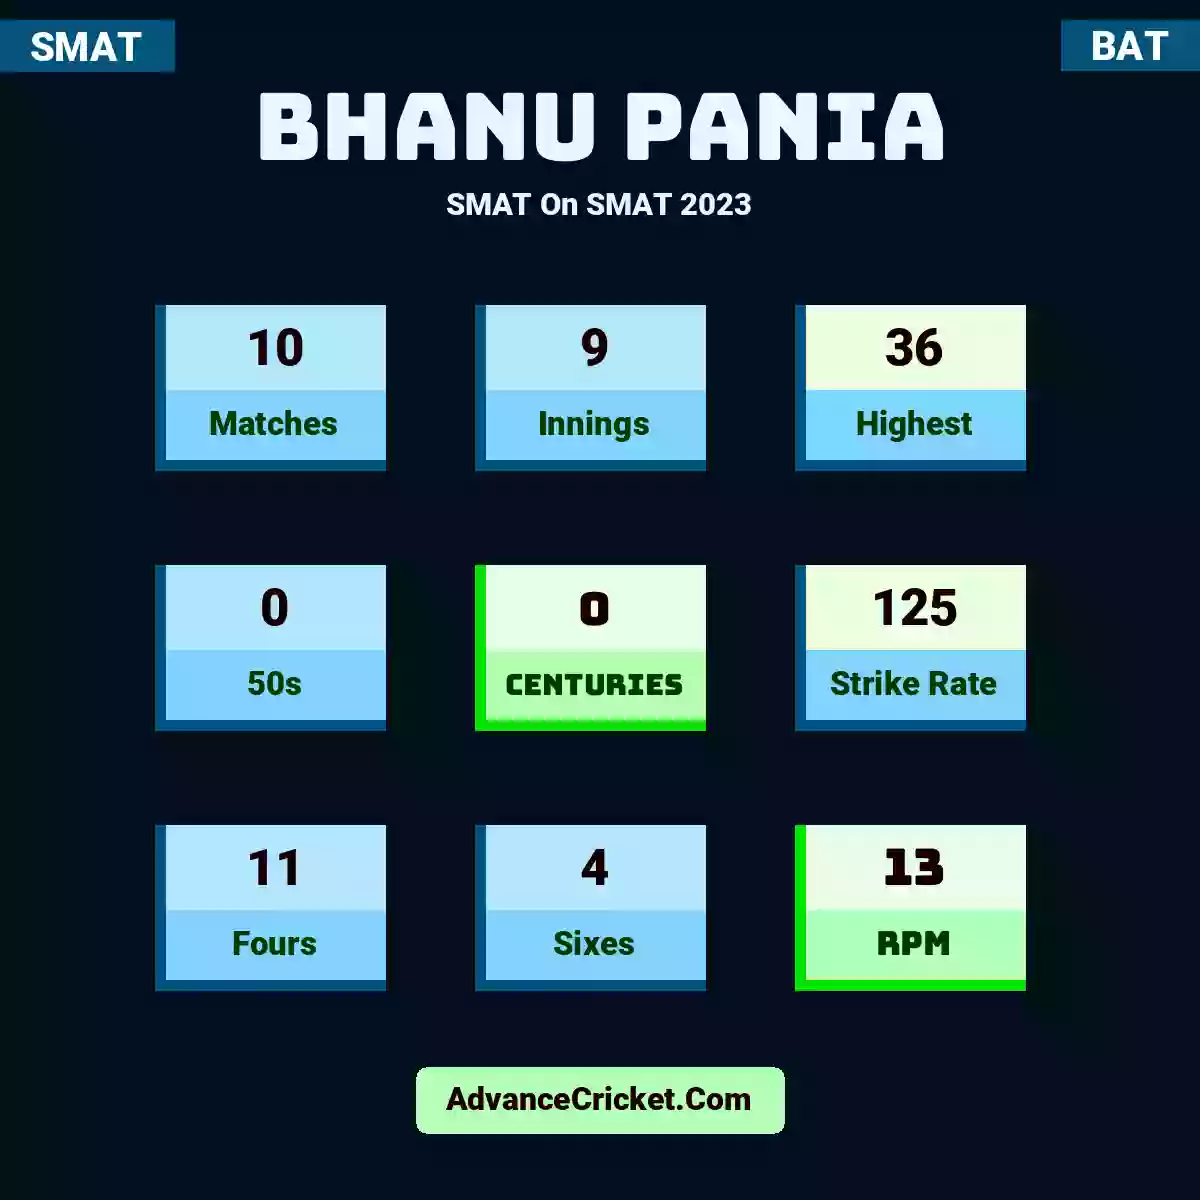 Bhanu Pania SMAT  On SMAT 2023, Bhanu Pania played 10 matches, scored 36 runs as highest, 0 half-centuries, and 0 centuries, with a strike rate of 125. B.Pania hit 11 fours and 4 sixes, with an RPM of 13.